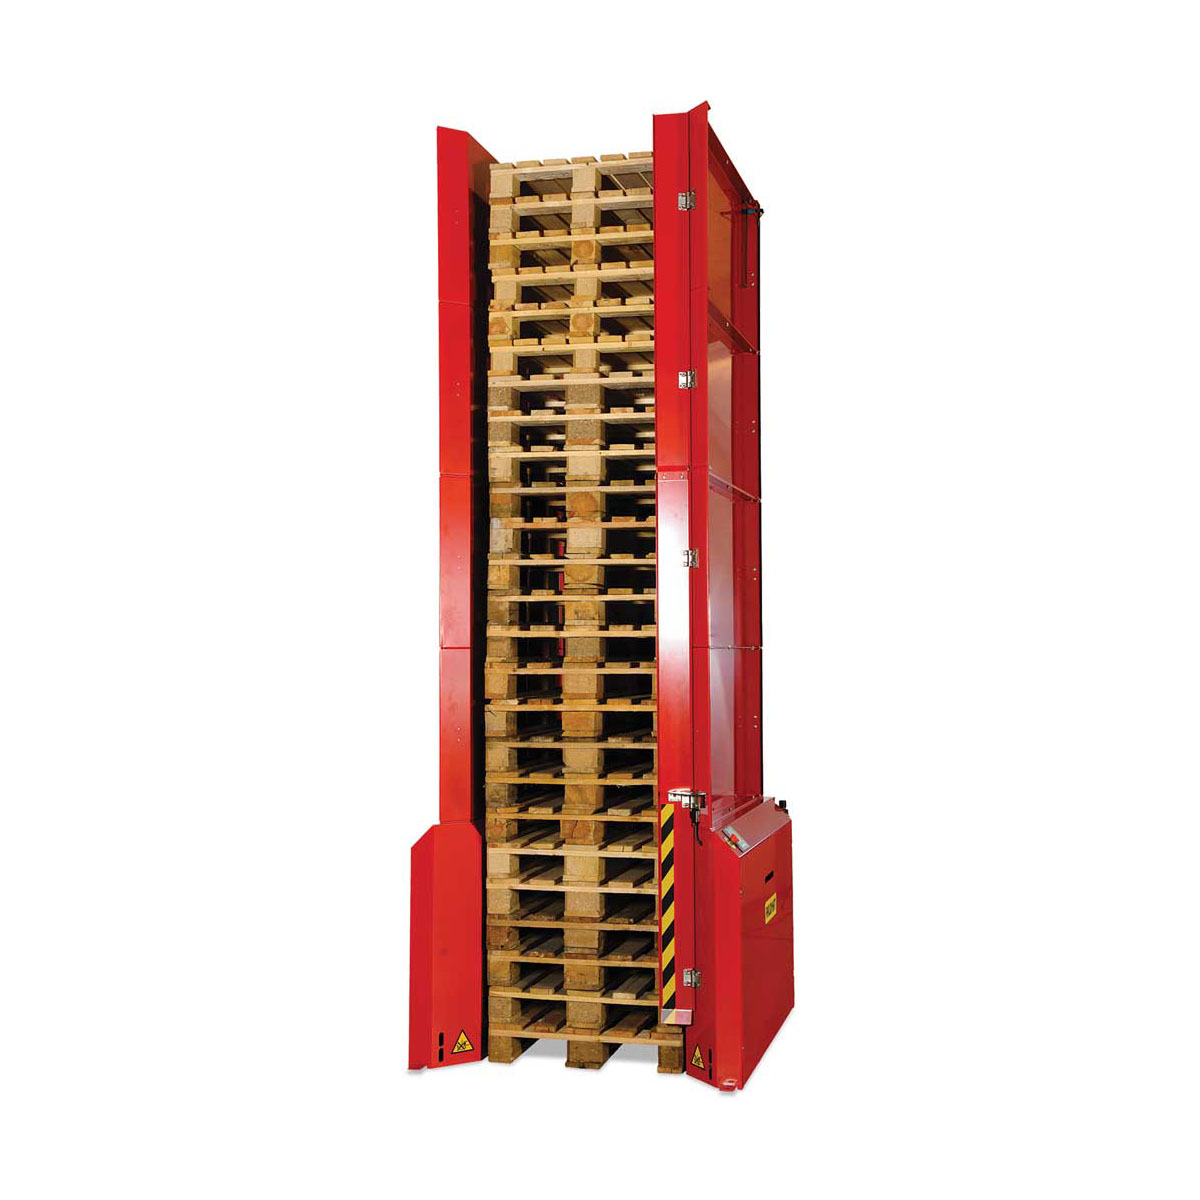 Buy Standard Electric Pallet Dispensers in Pallet Dispenser from Palomat available at Astrolift NZ